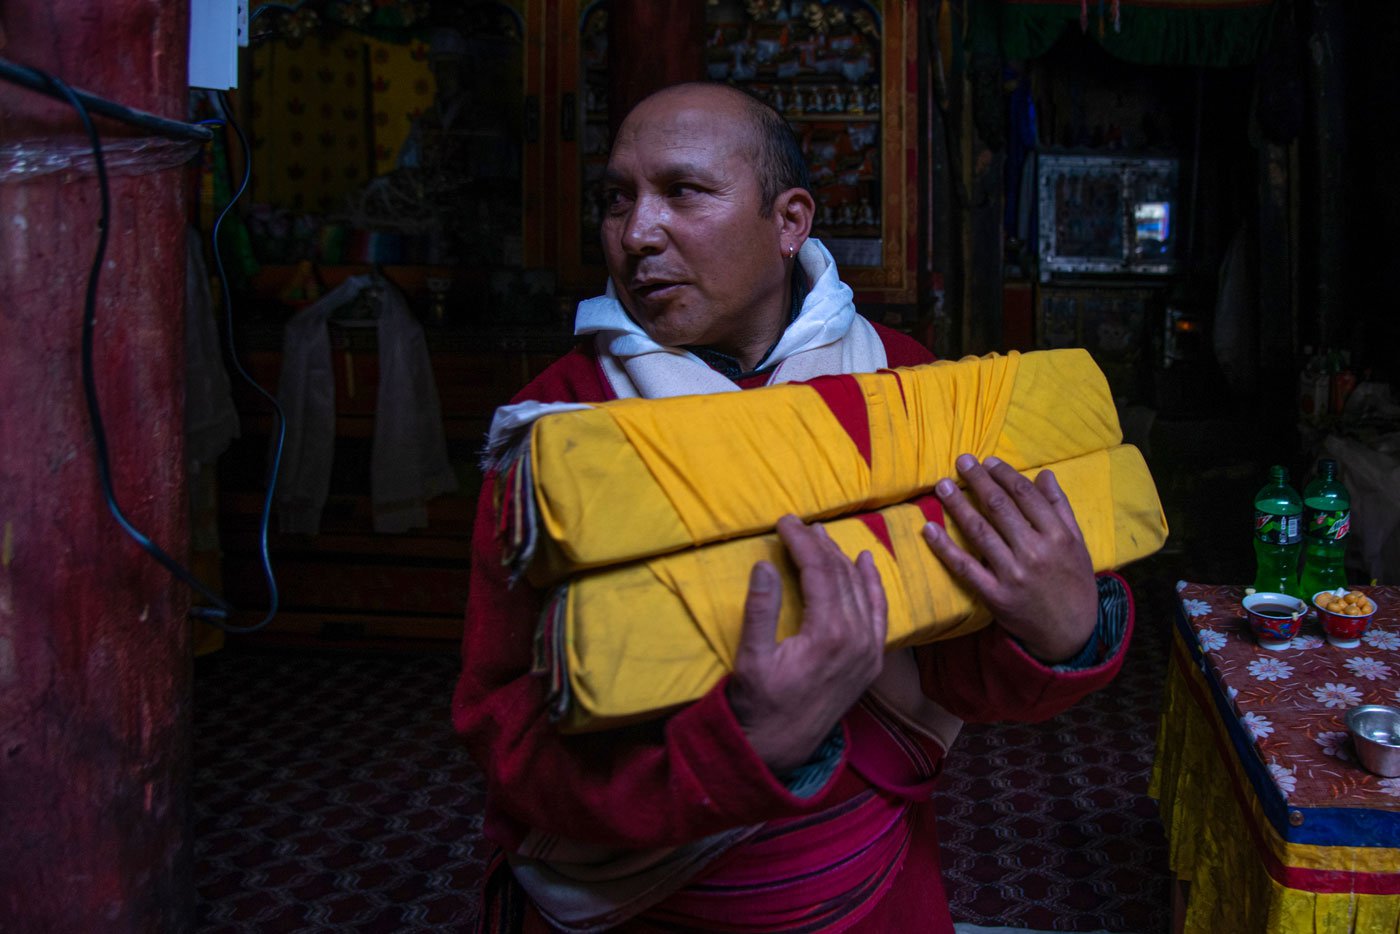 Sonam Dorje, one of the organisers of the Saga Dawa festival, carries holy scrolls from the monastery in Hanle. The scrolls accompany Buddha’s idol as it travels across villages and hamlets in the region